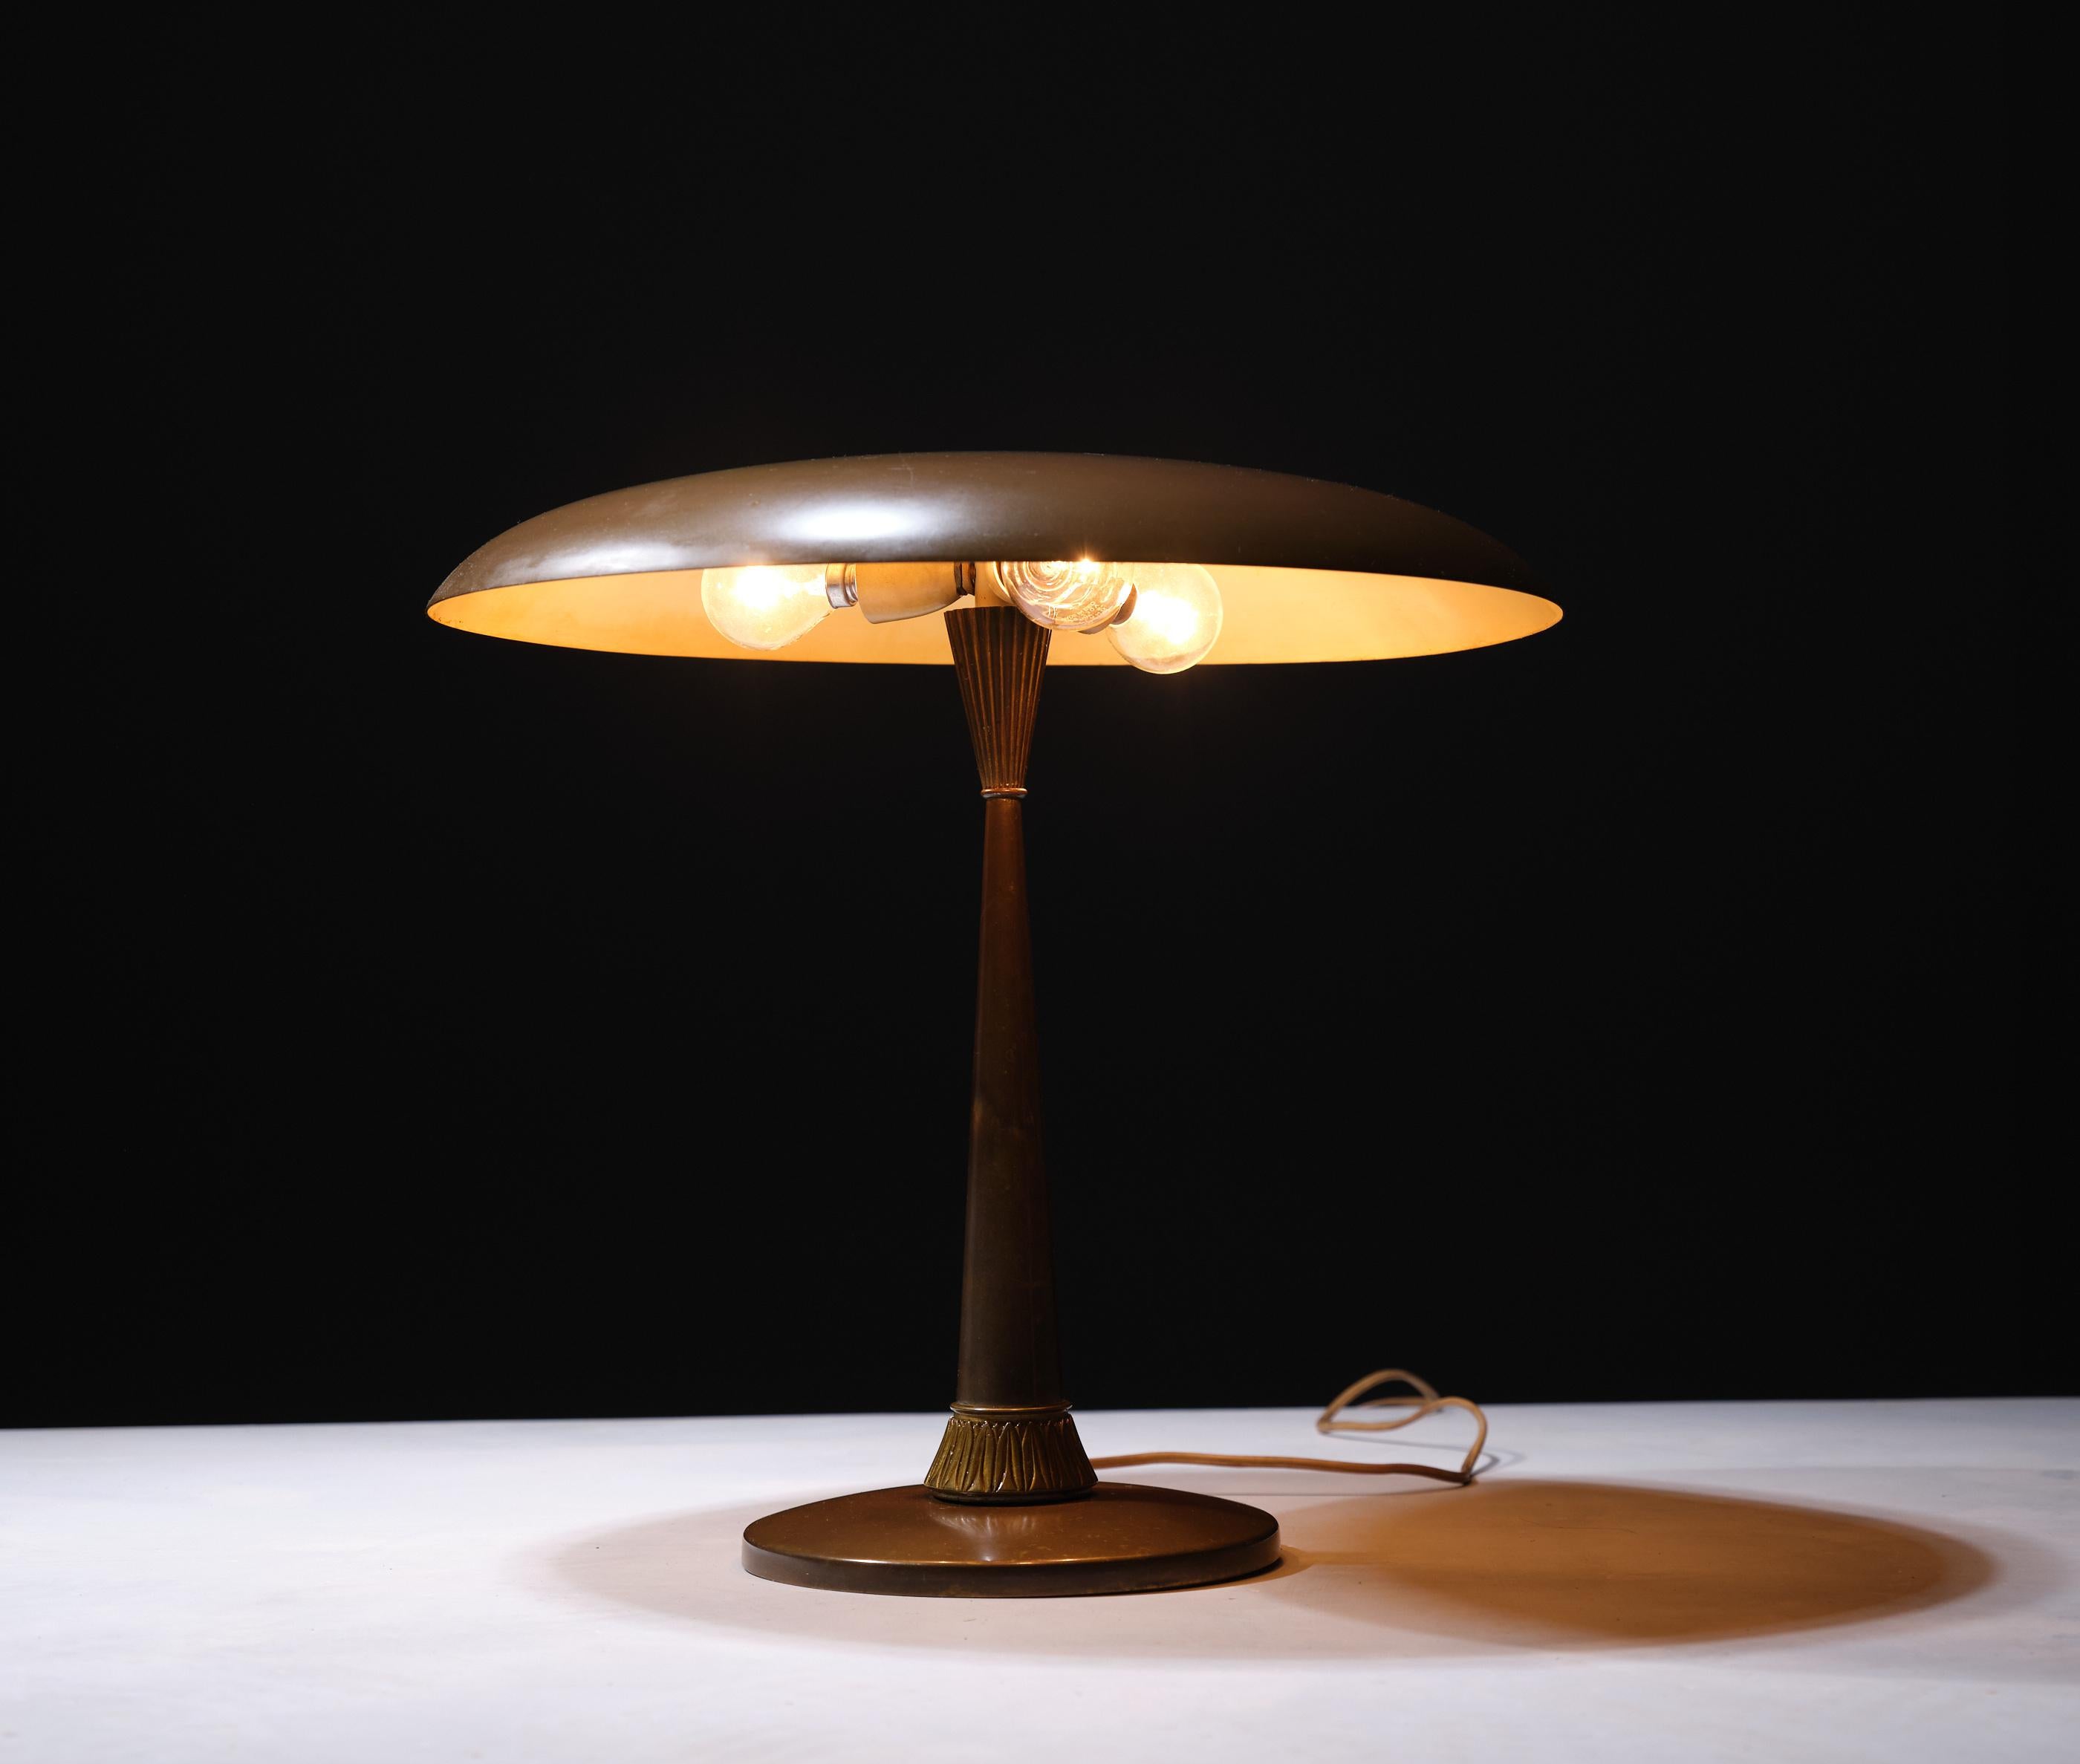 Metal Big Italian Table or Desk Lamp in Brass, 1950s For Sale